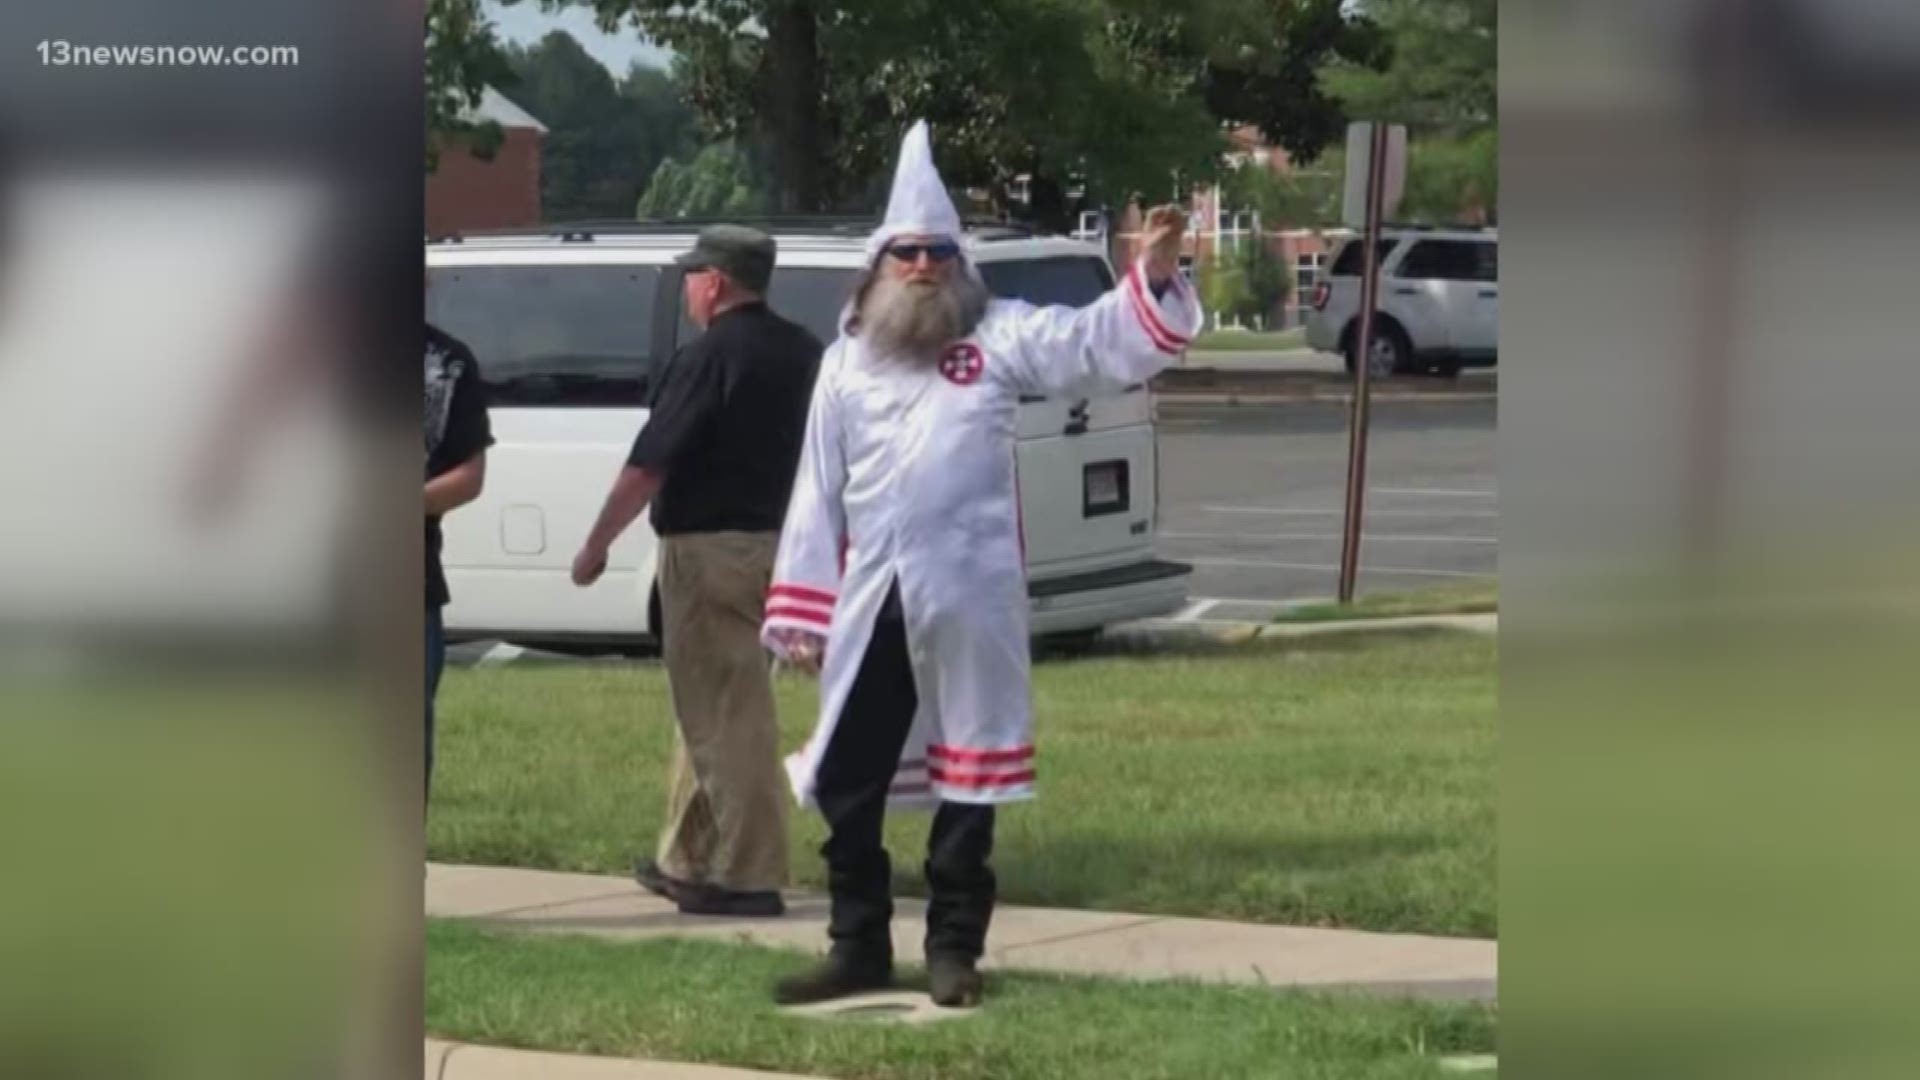 About a dozen people wearing white Klan robes and waving Confederate flags held a recruitment rally Saturday outside a Virginia courthouse.